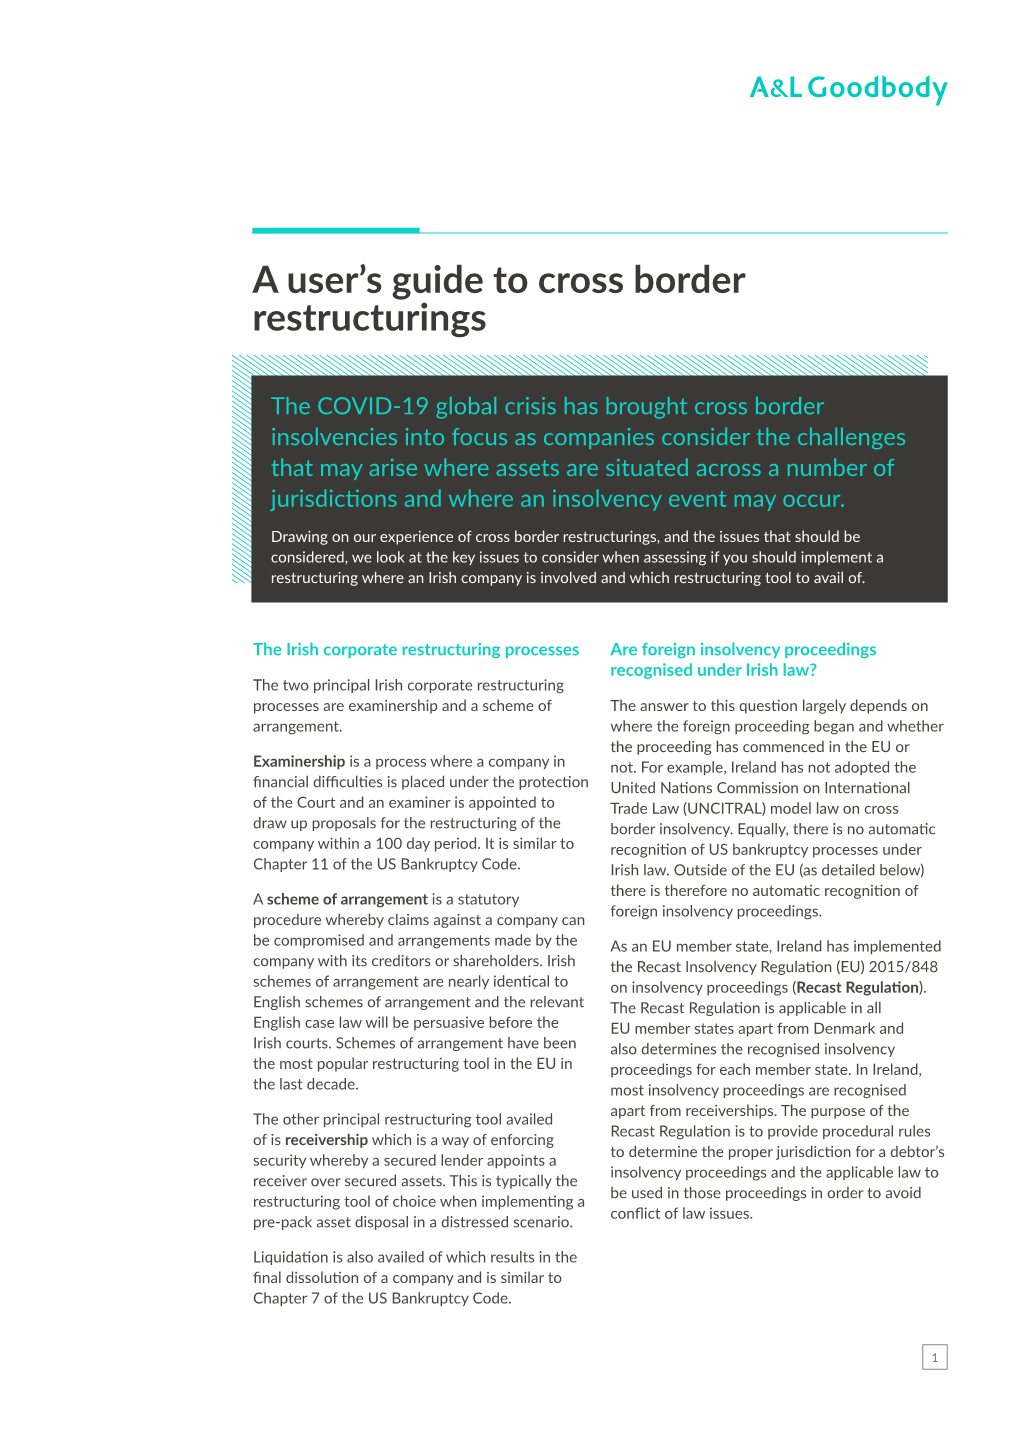 A User's Guide to Cross Border Restructurings